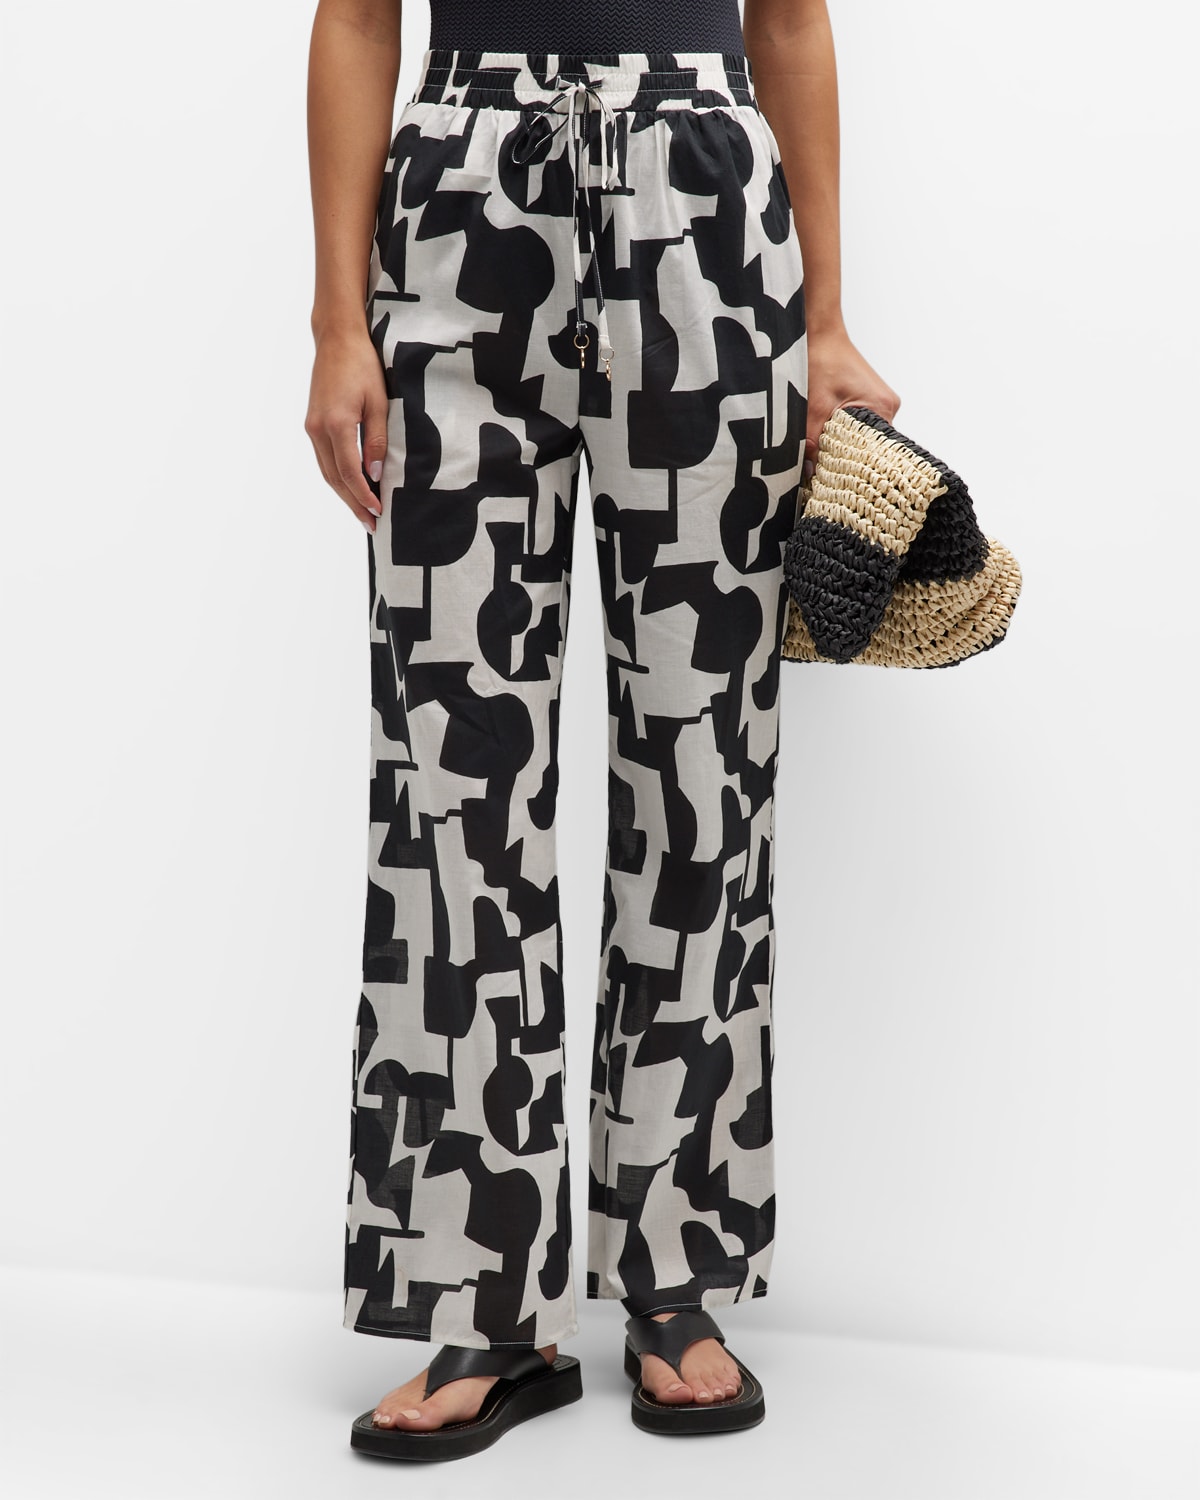 Milly Cabana Modern Geo Cotton Voile Wide-Leg Pants